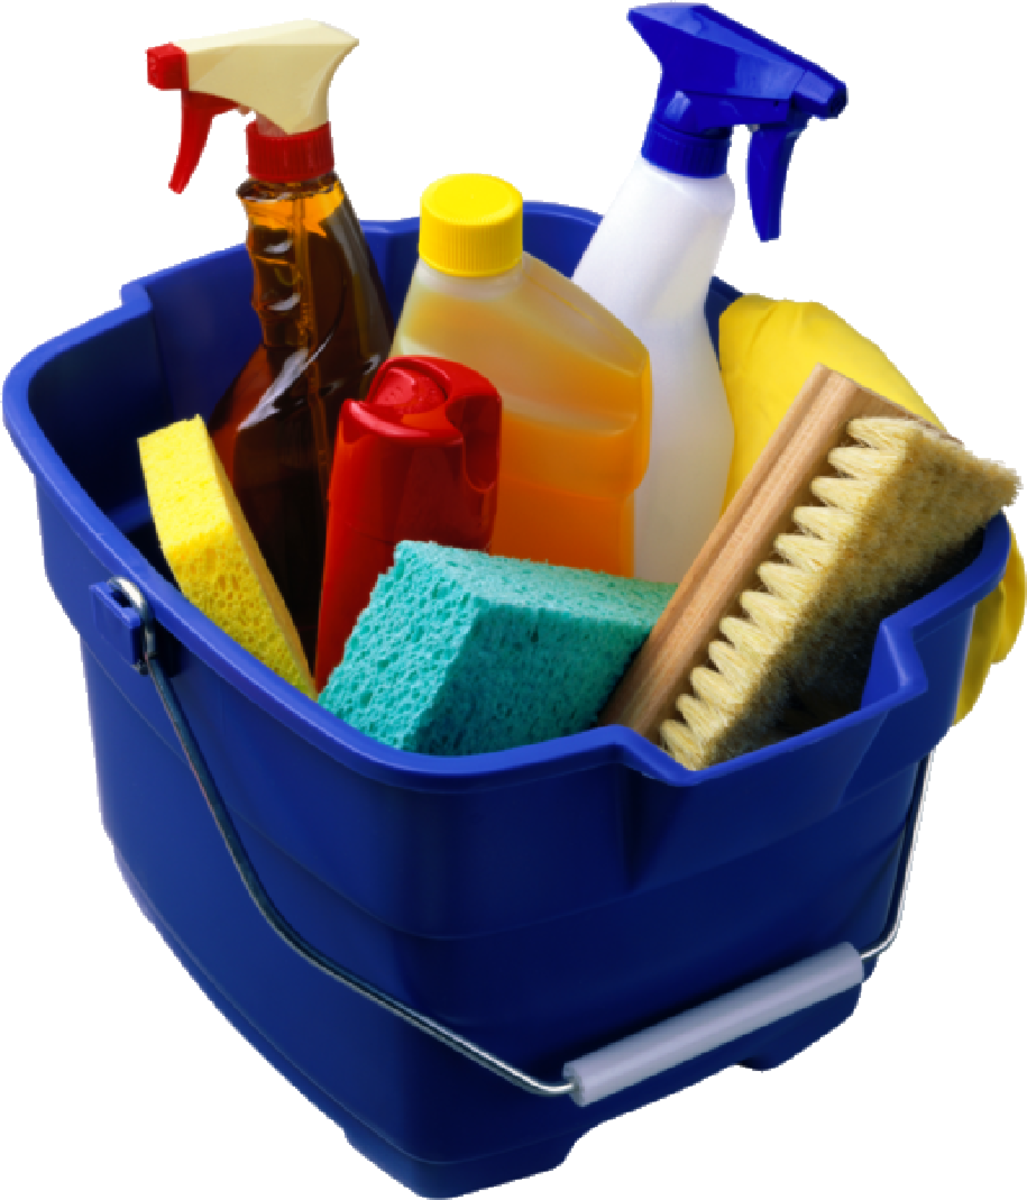 Cleaning supplies are an example of routine purchases: low-involvement and low-risk.